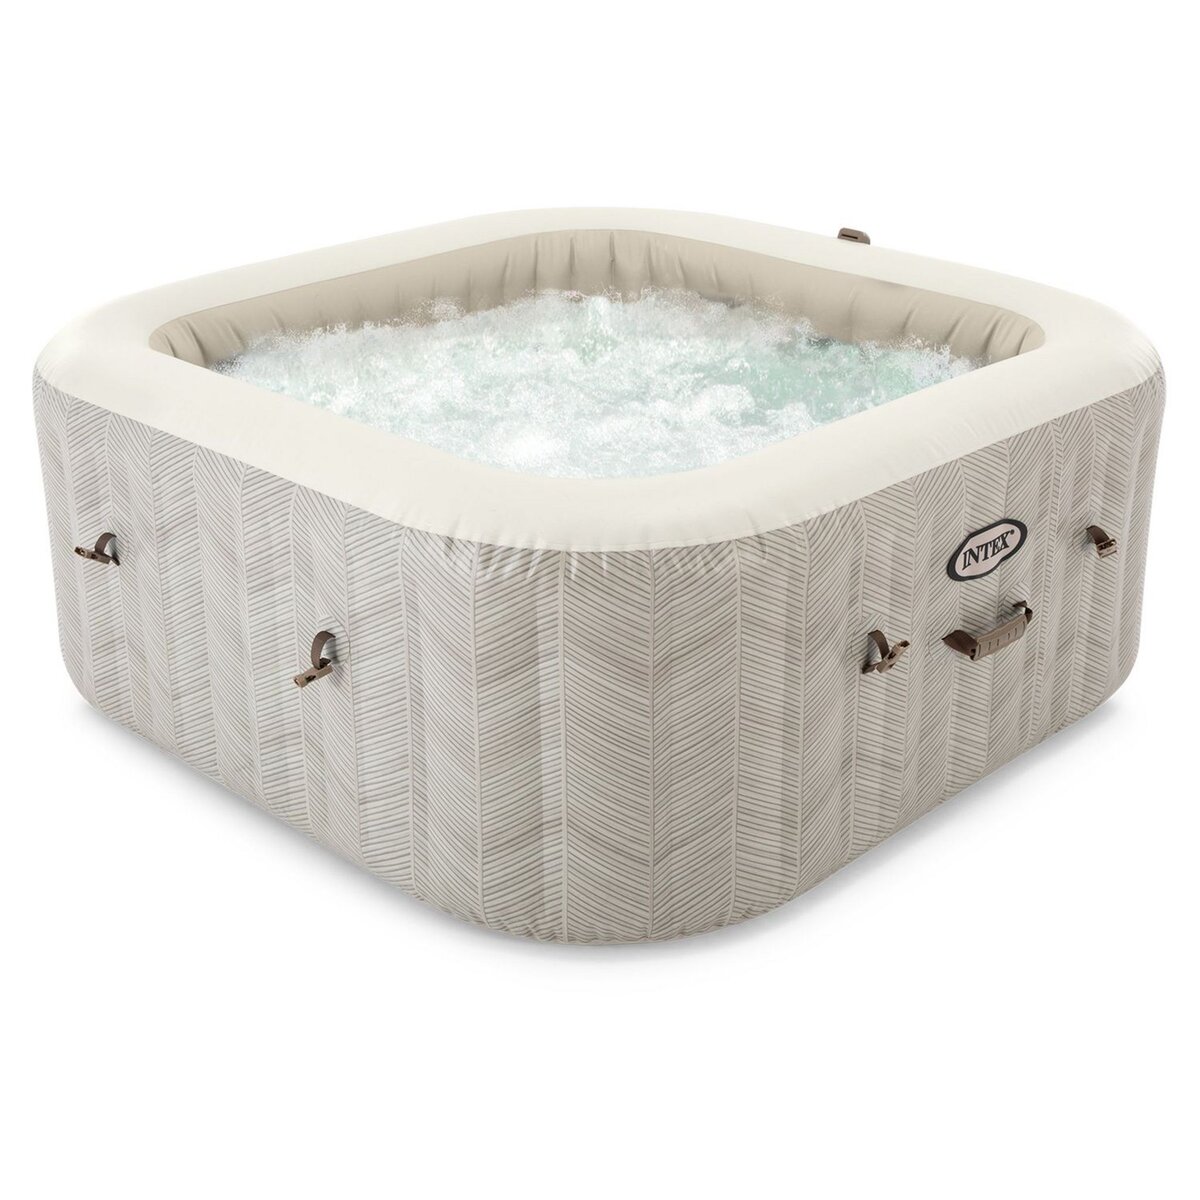 Intex - 28428EX - Pure spa gonflable sahara 6 places